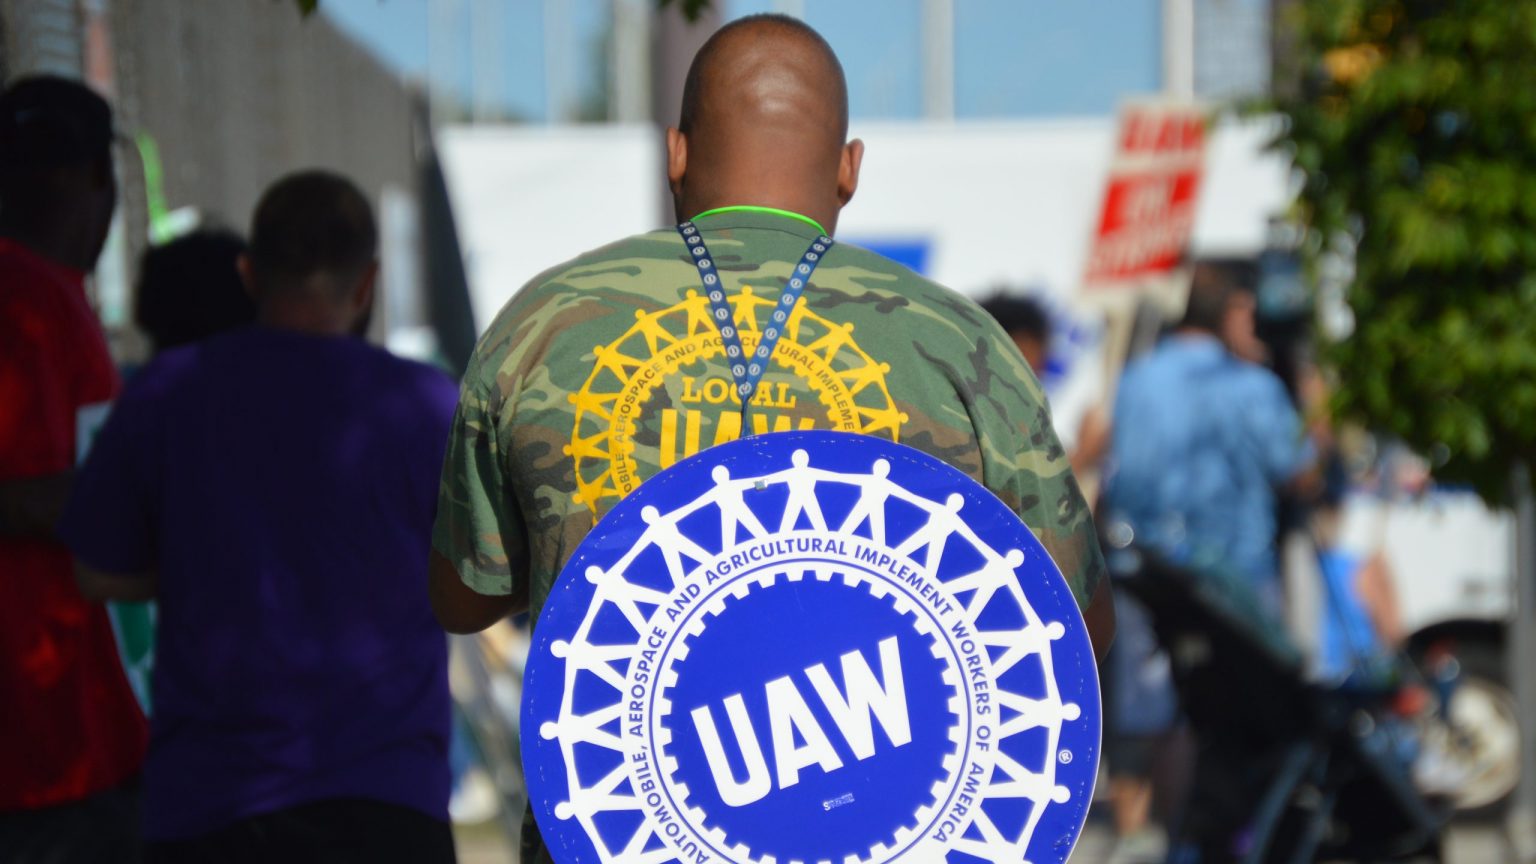 UAW president promises members will get 'fair share' from automakers